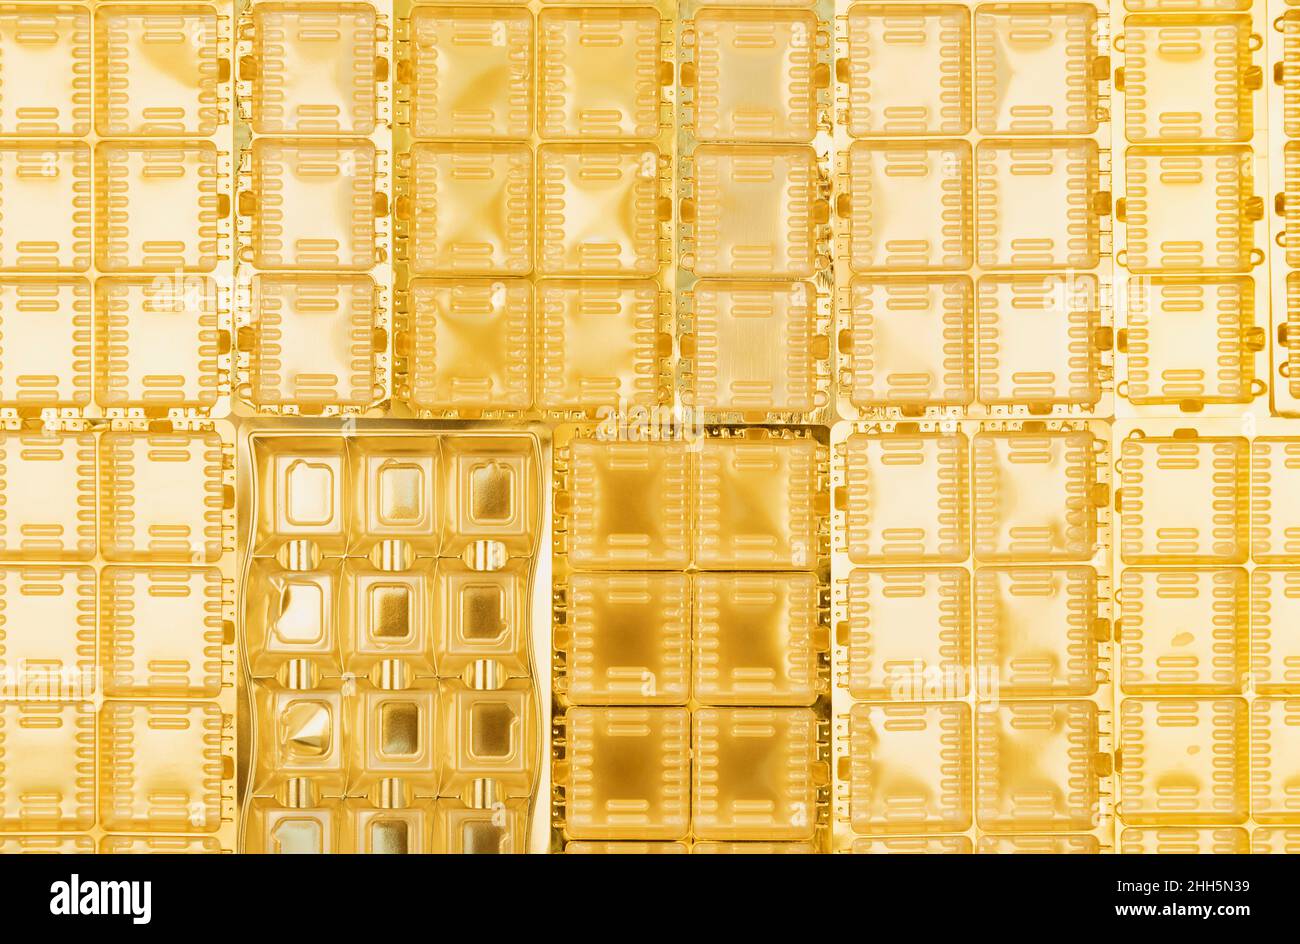 Full frame of gold colored plastic packaging Stock Photo